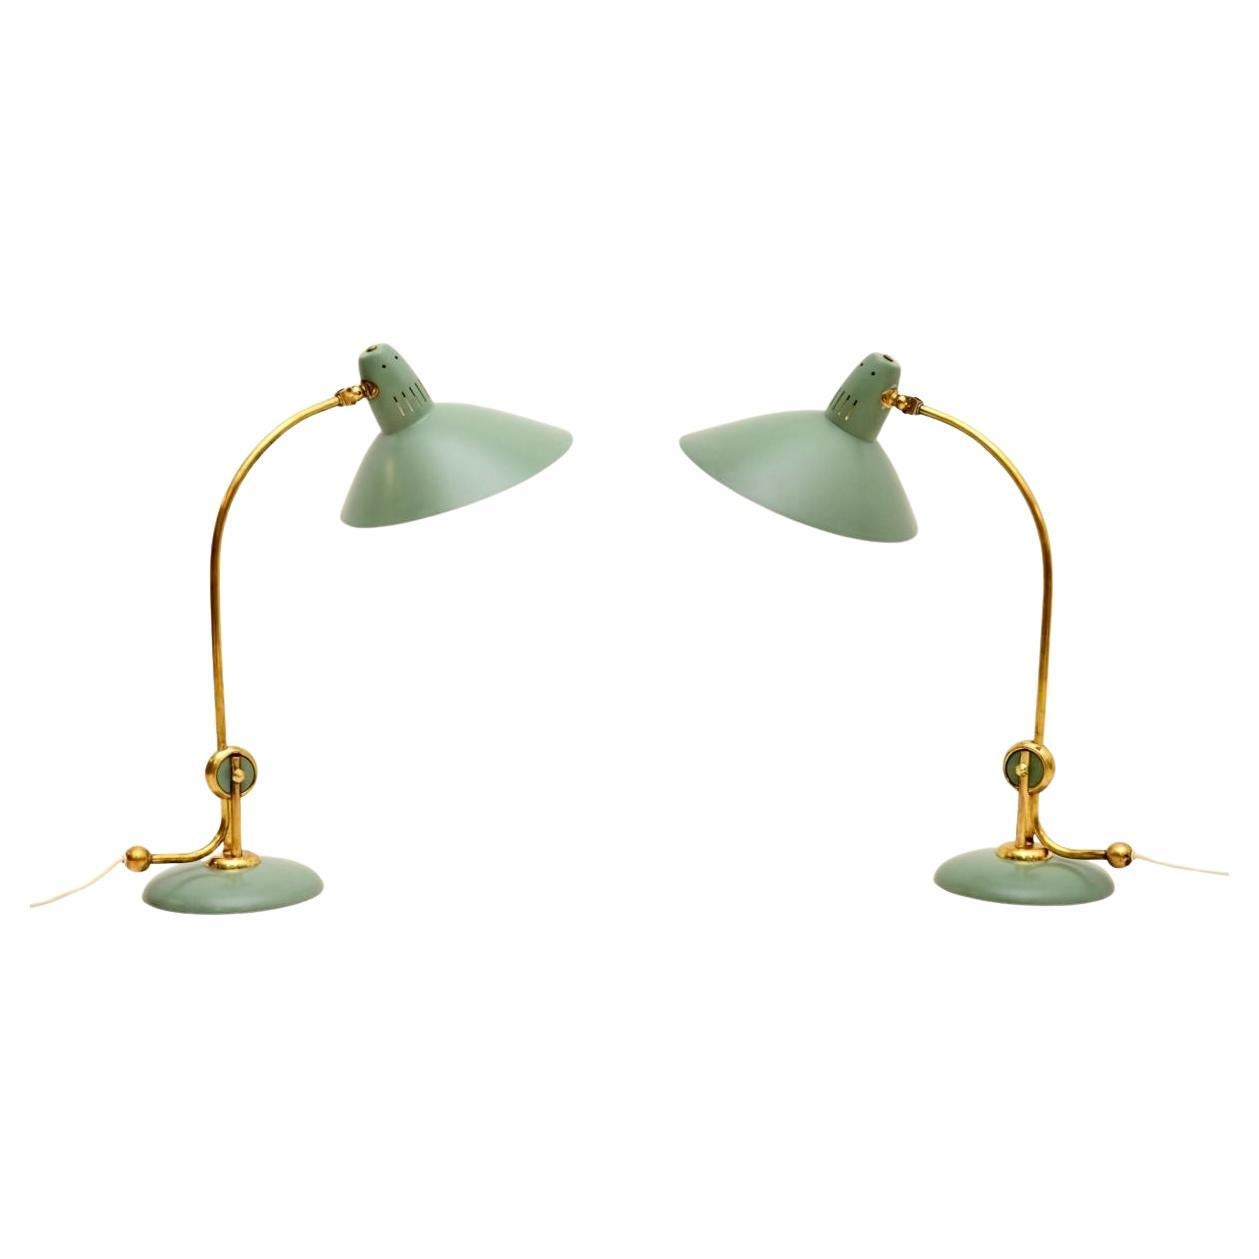 Pair of Vintage Table Lamps by Hala Zeist For Sale